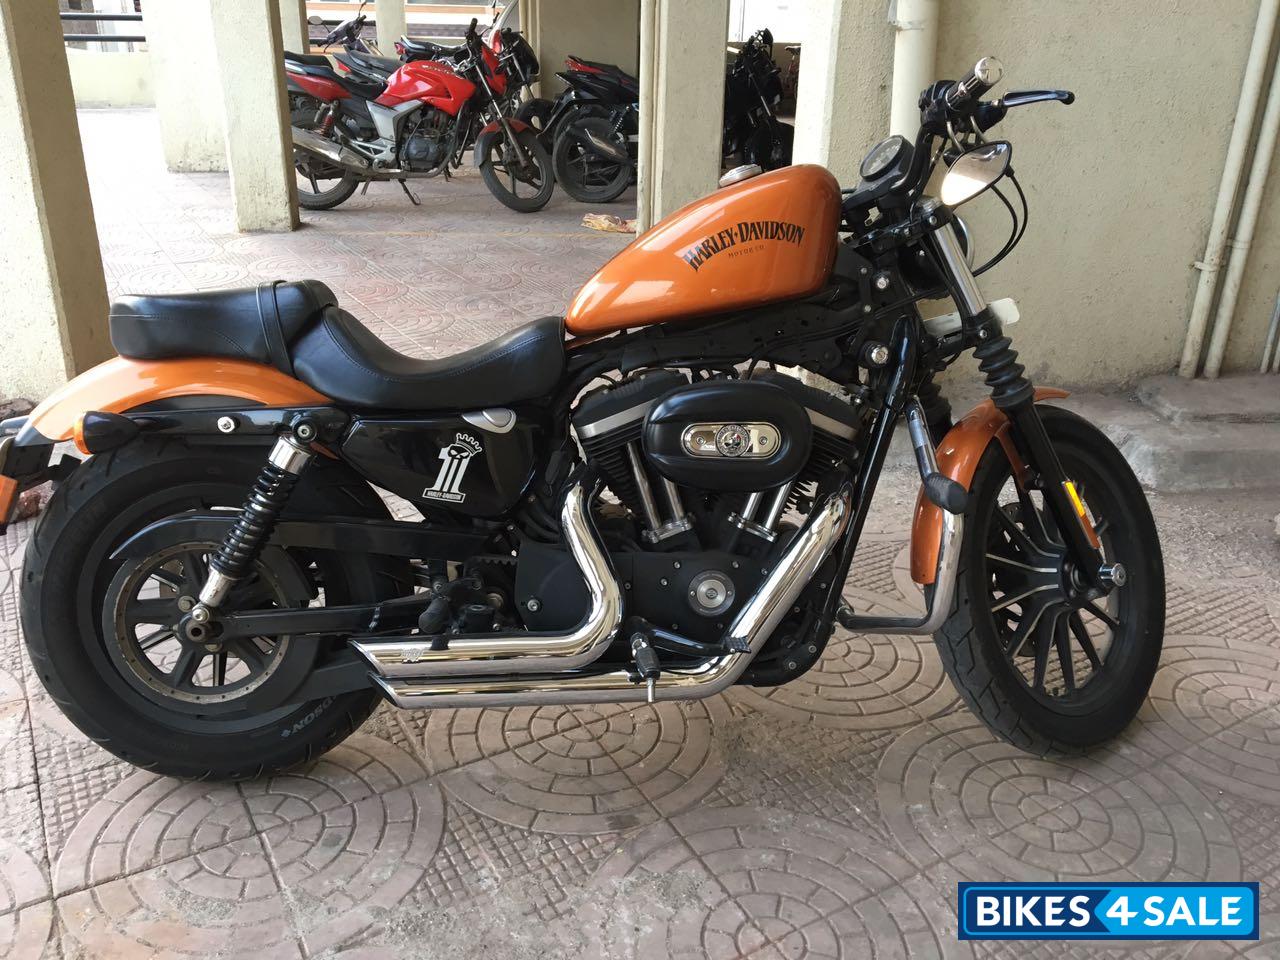 Used 2014 Model Harley Davidson Iron 883 For Sale In Ahmednagar Id 165950 Amber Colour Colour Bikes4sale